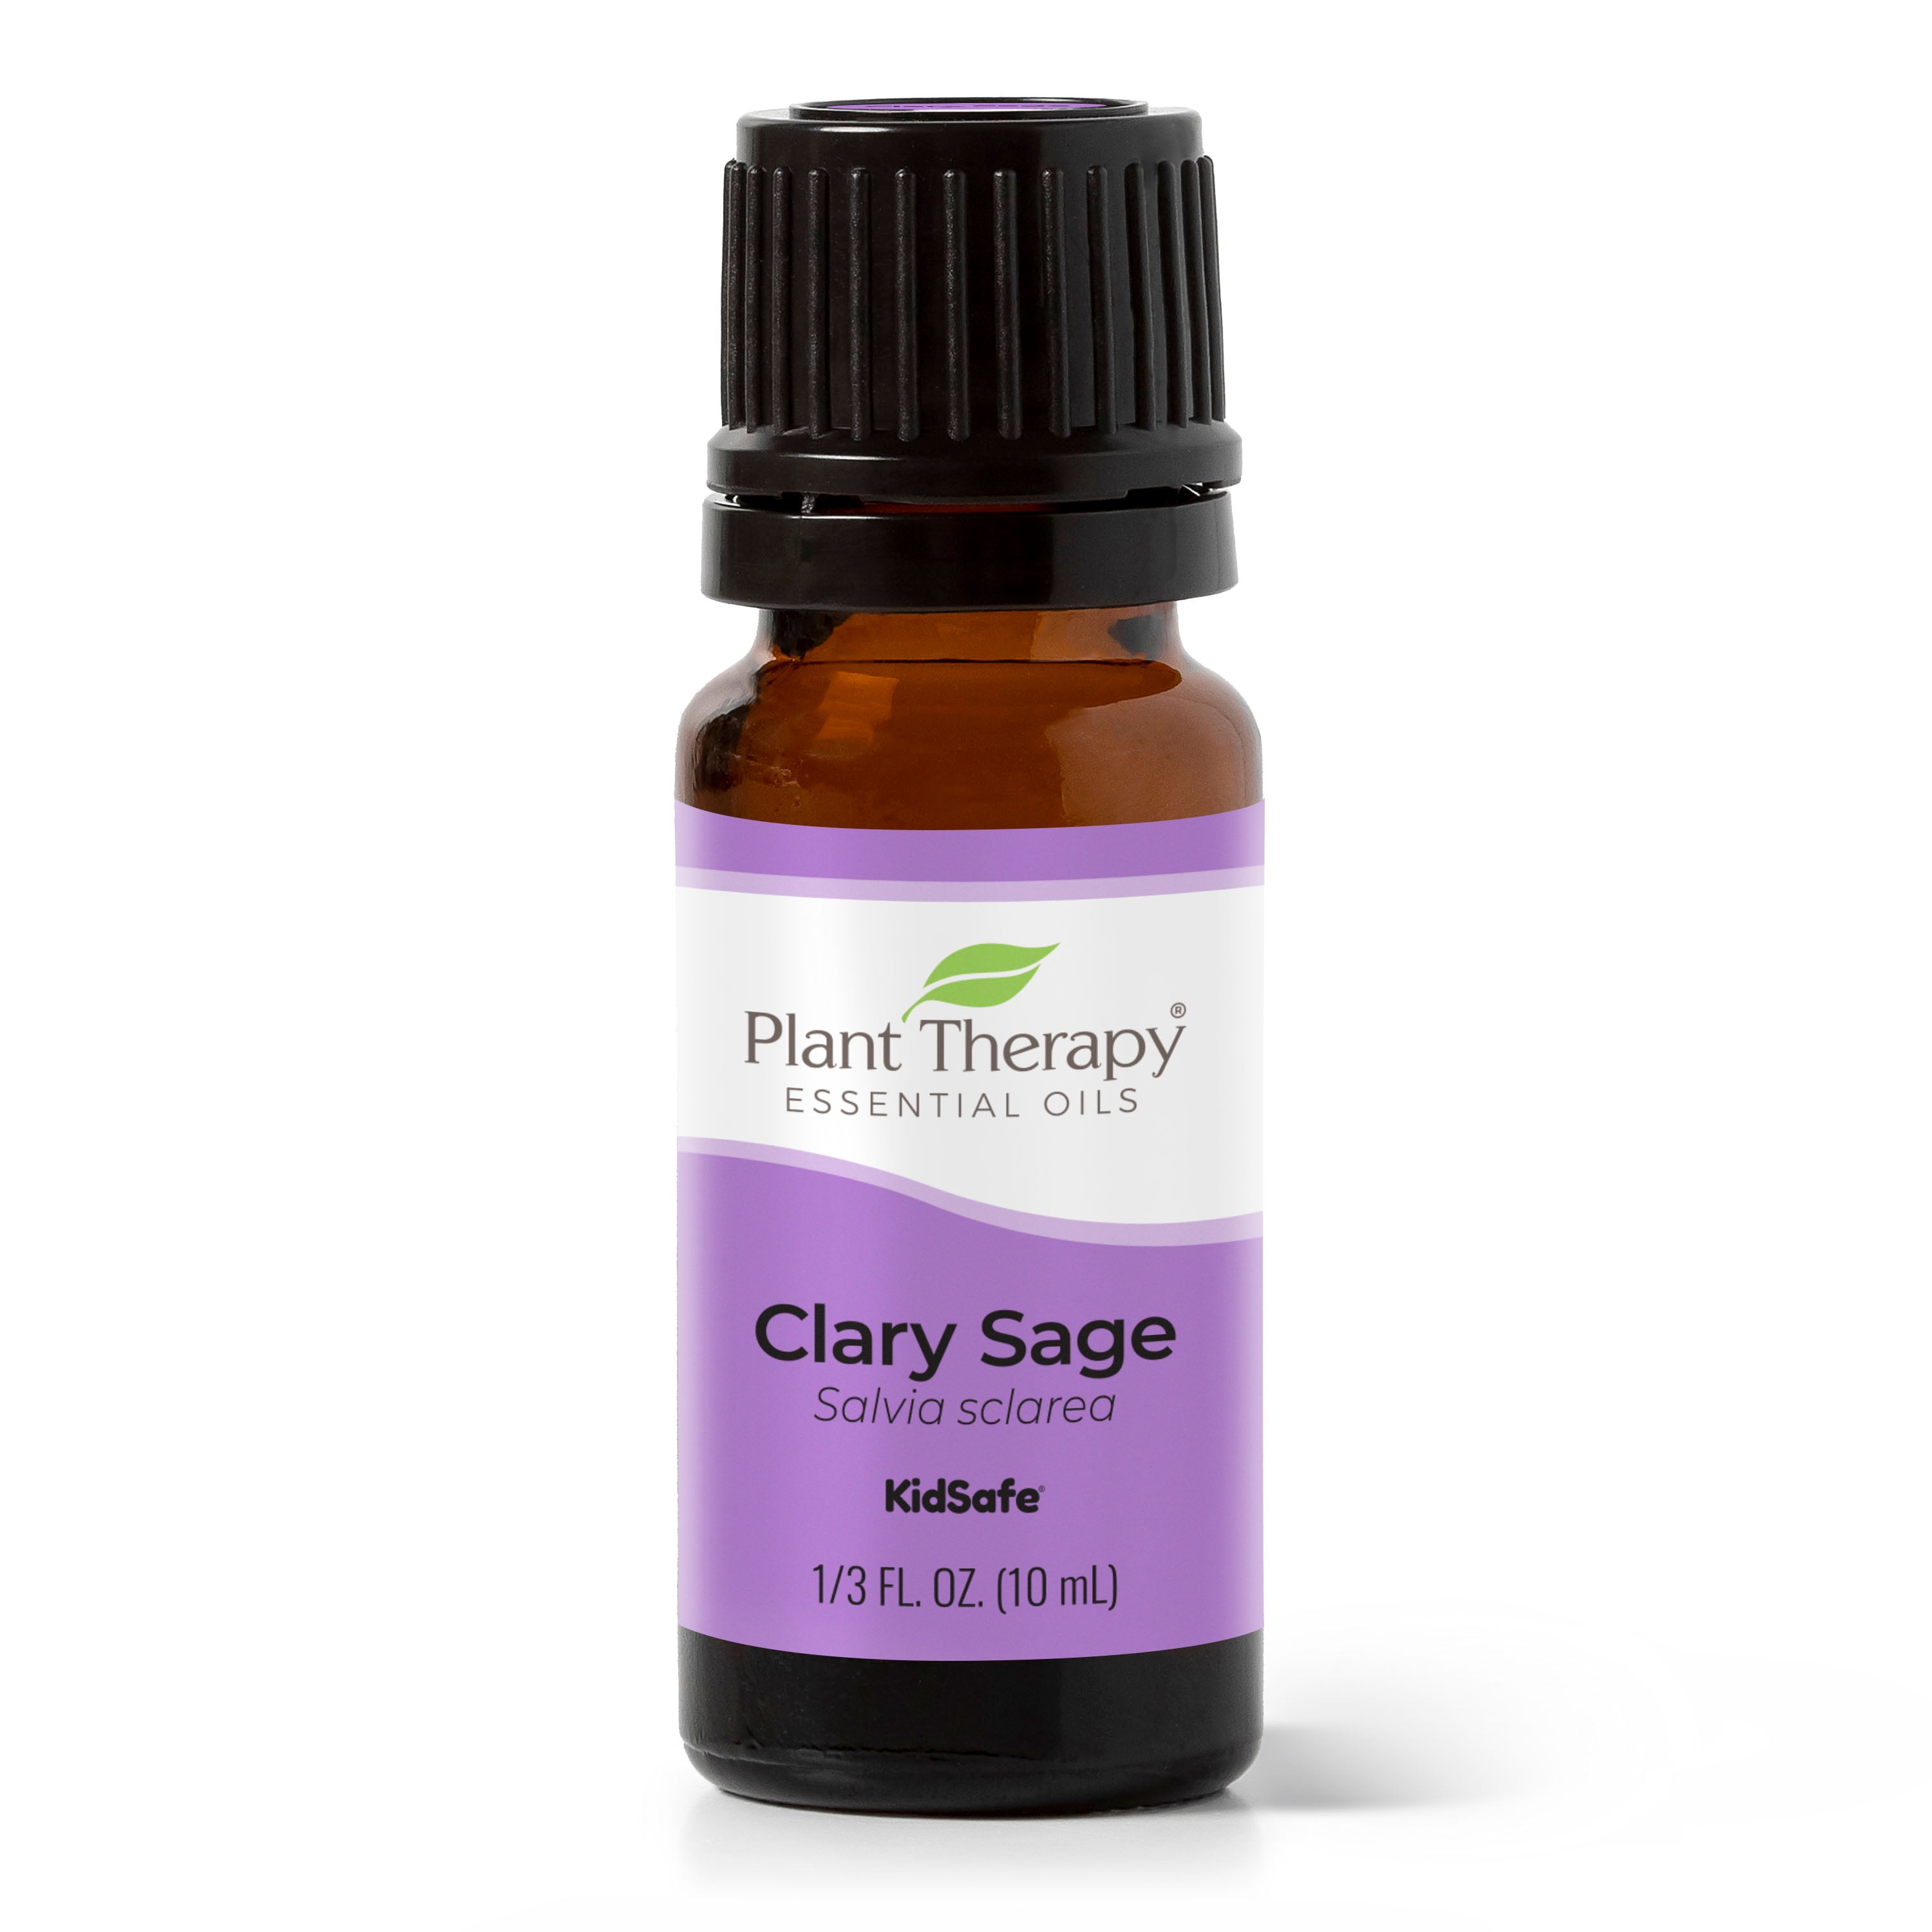 Plant Therapy Clary Sage Essential Oil 100% Pure, Undiluted, Natural  Aromatherapy, Therapeutic Grade 10 mL (1/3 fl oz) 